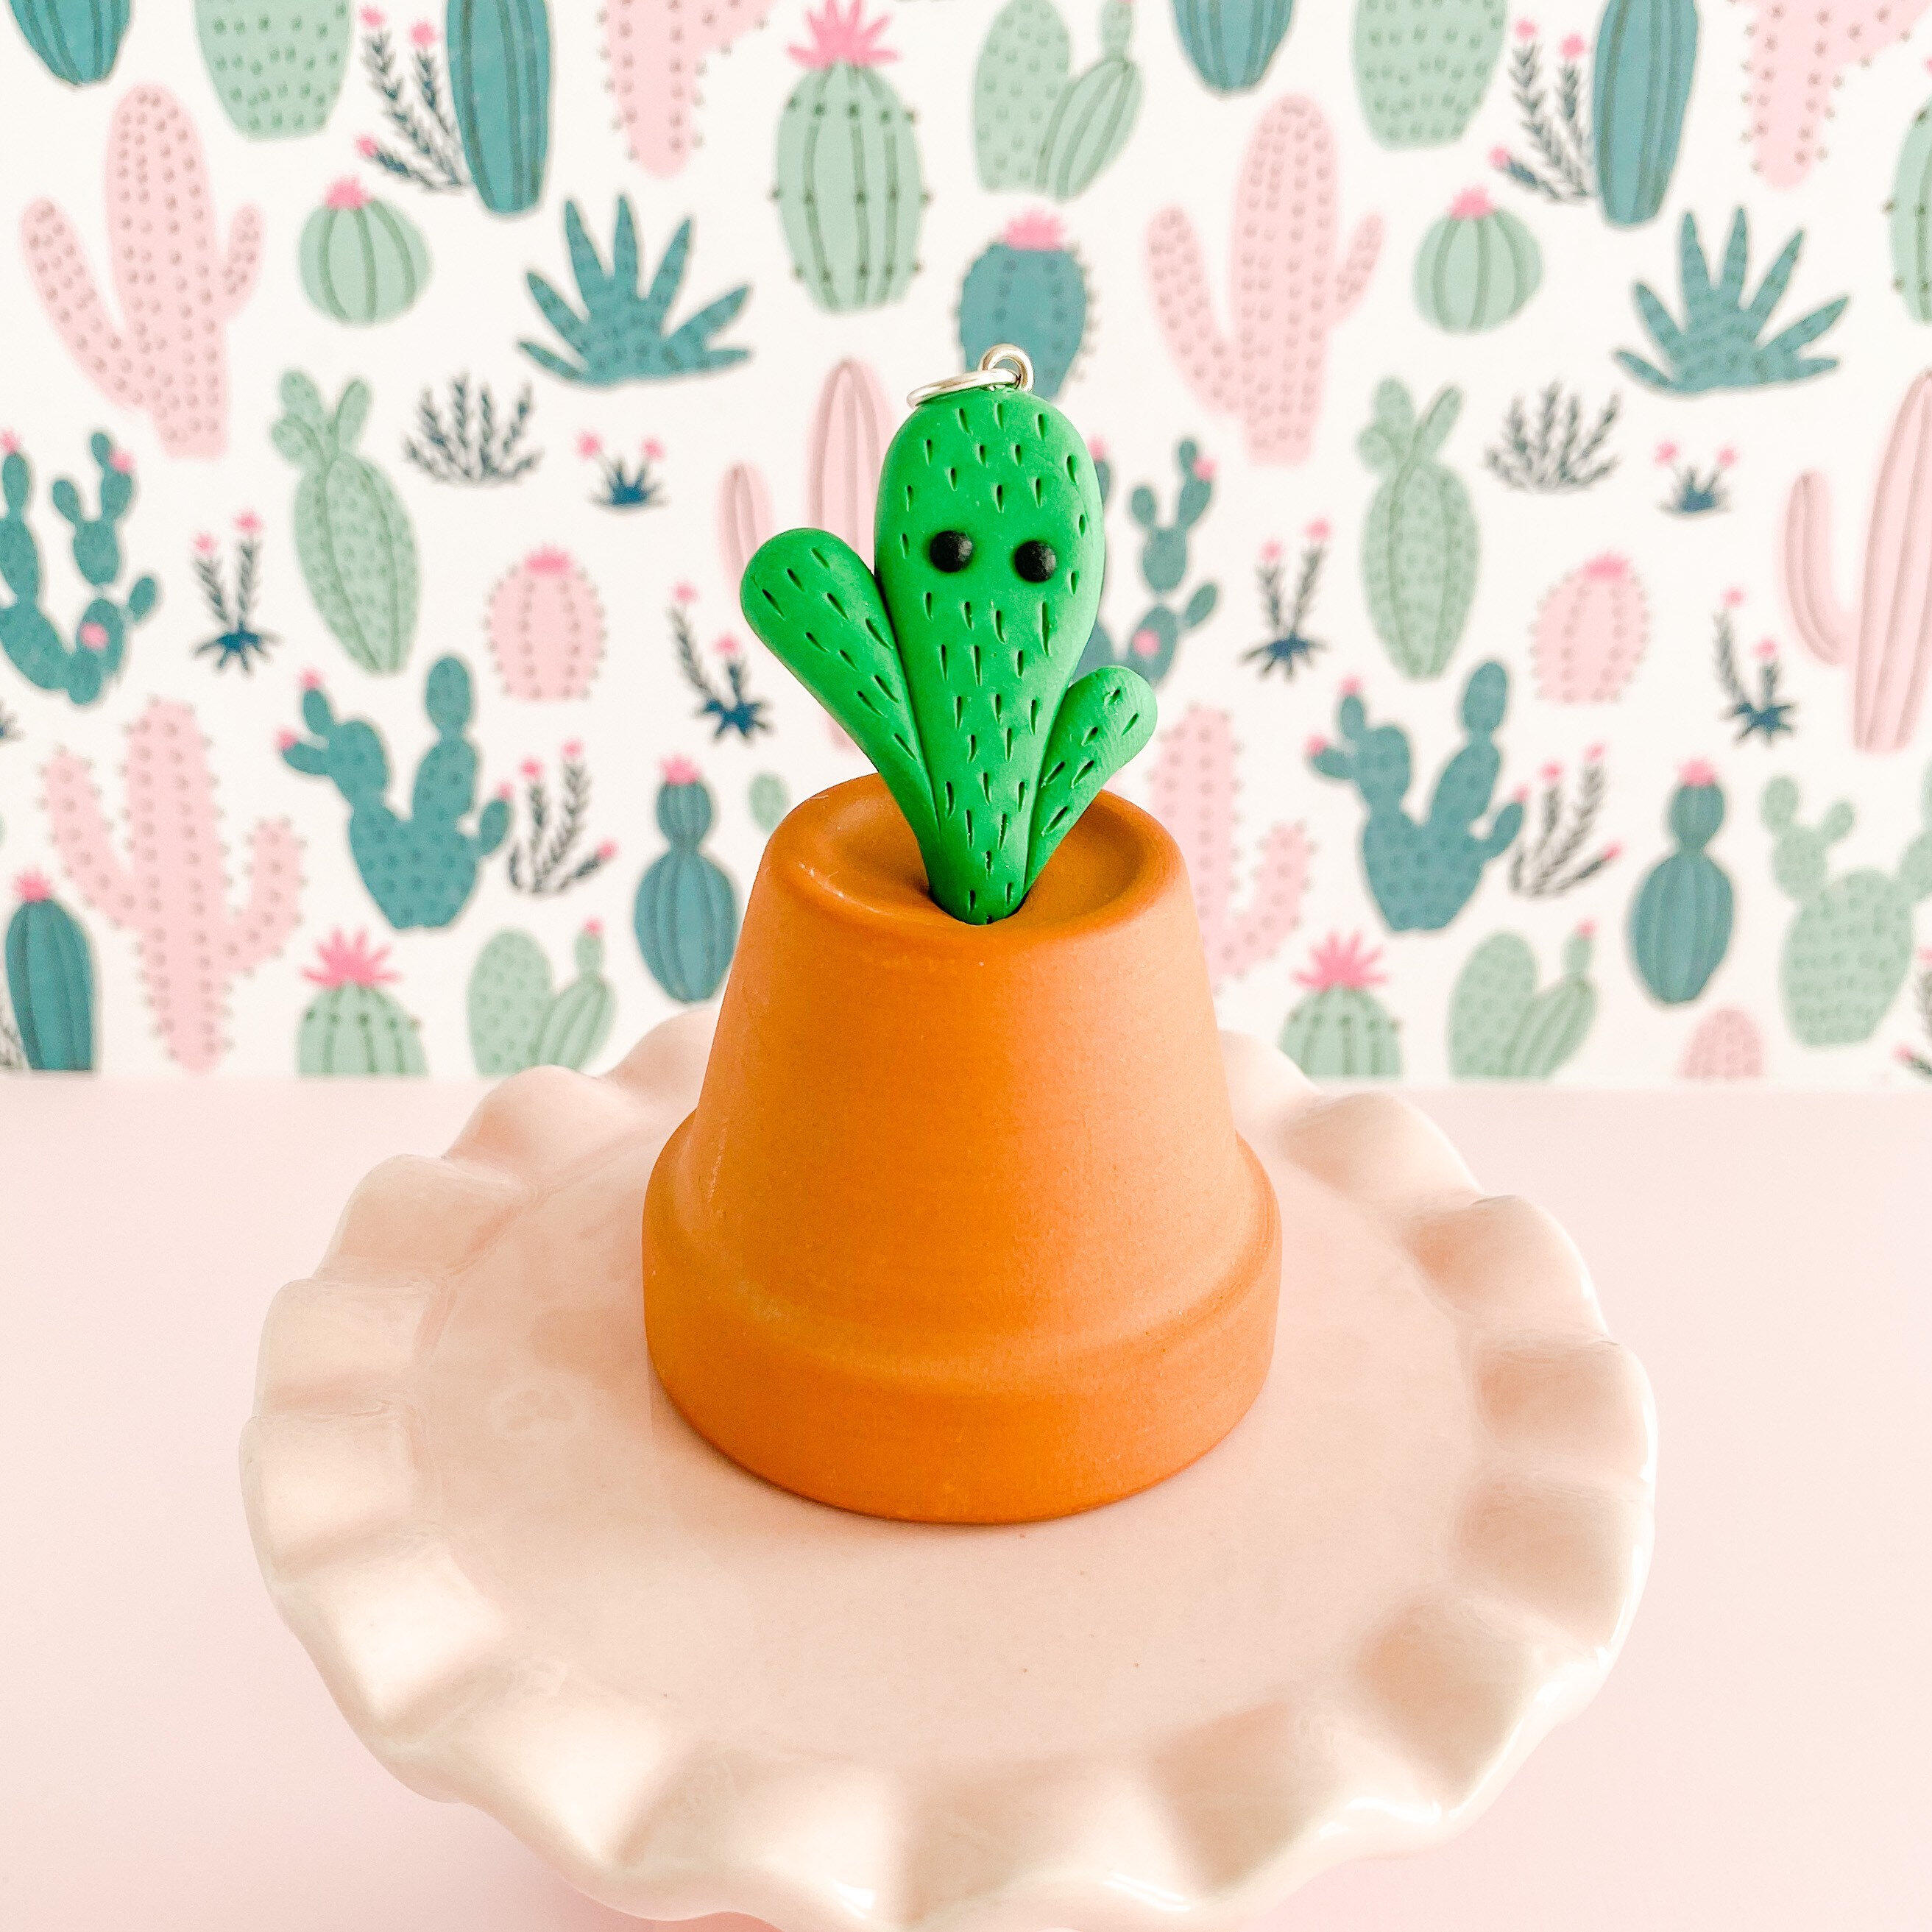 fireflyFrippery Cactus Charm with eyes Displayed on Upside Down Miniature Terra Cotta Pot